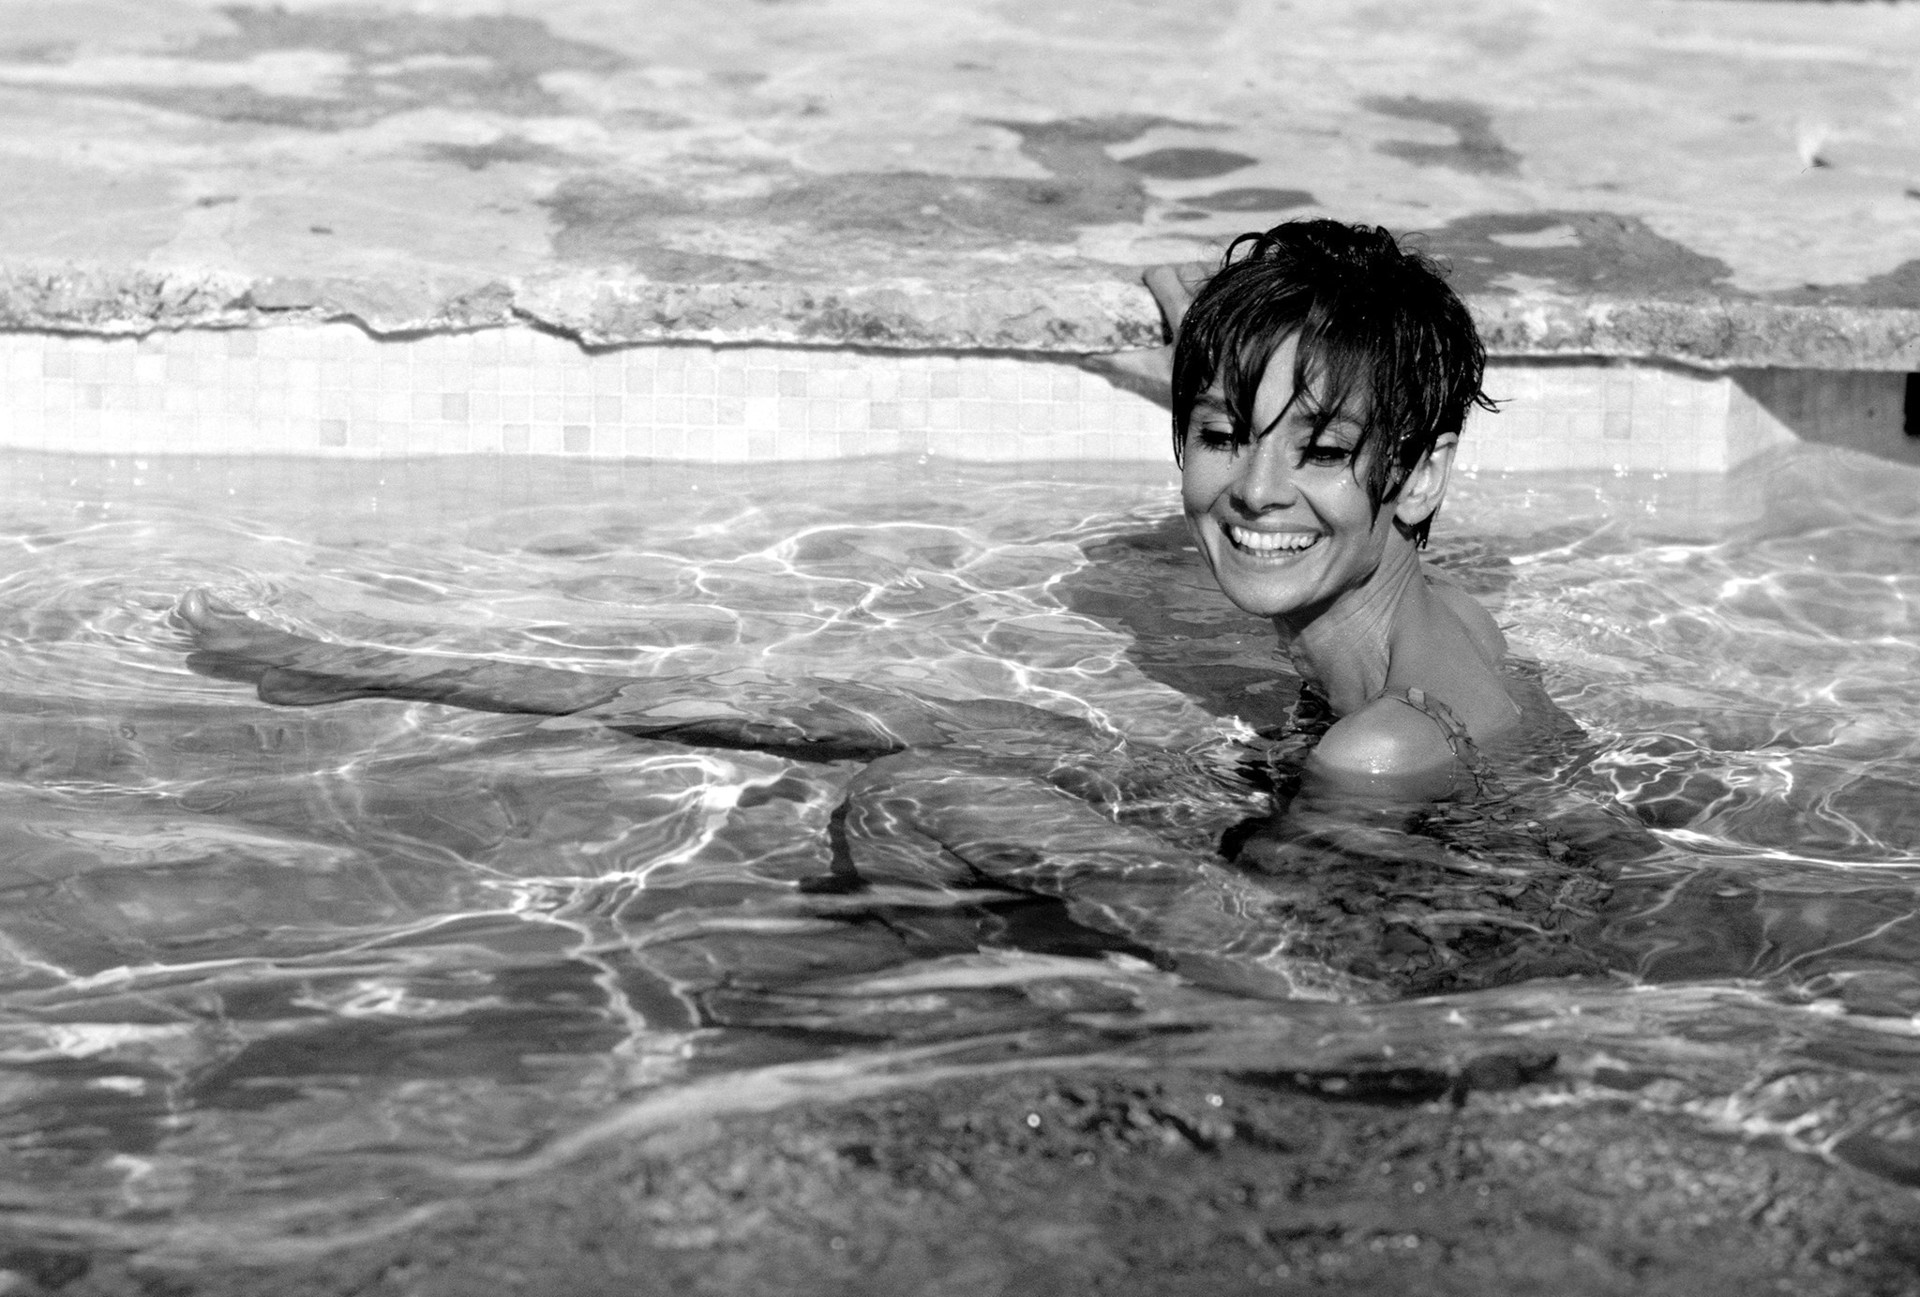 Audrey Hepburn in Pool by Terry O'Neill